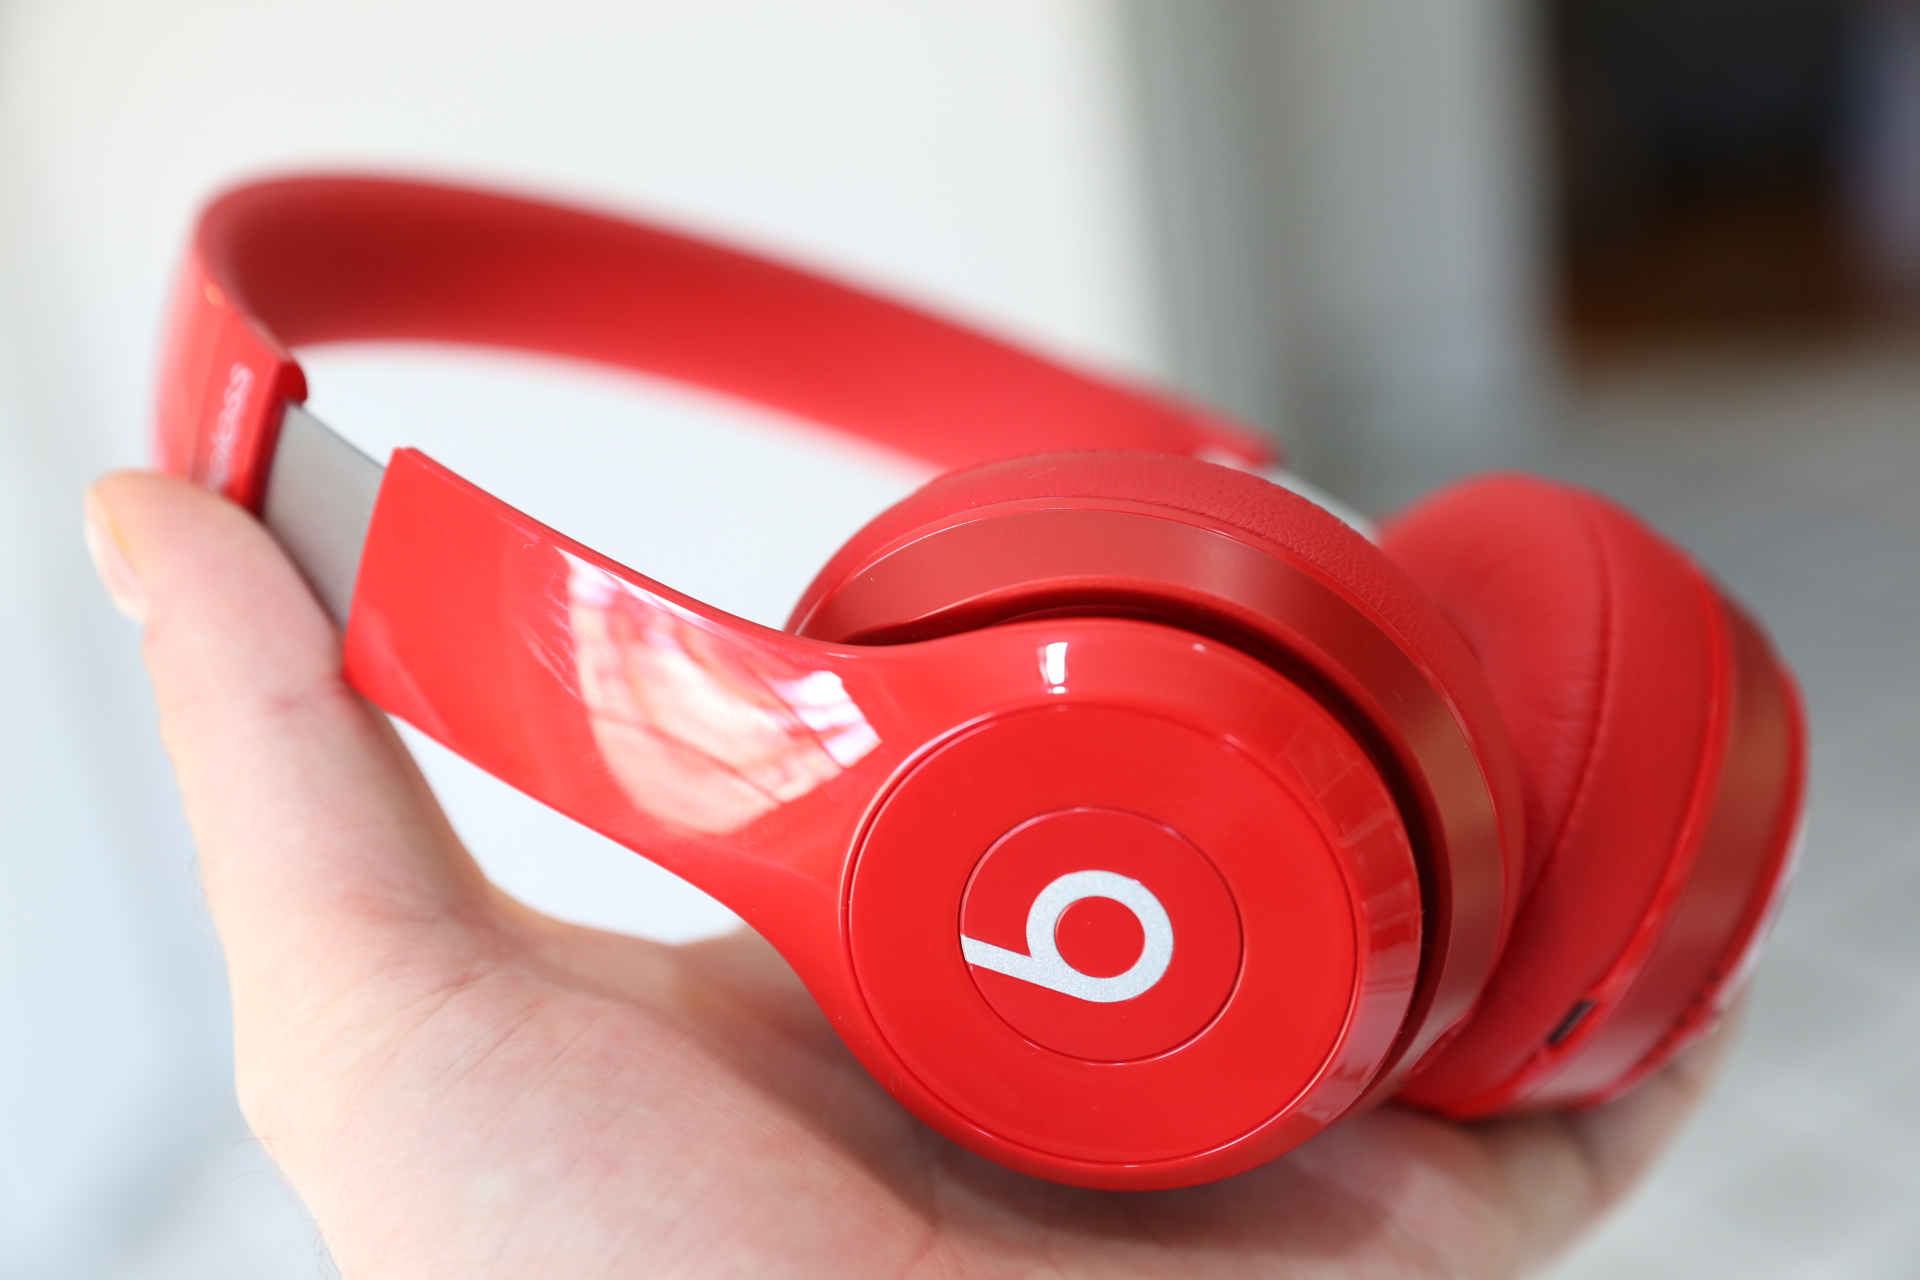 beats solo wired red